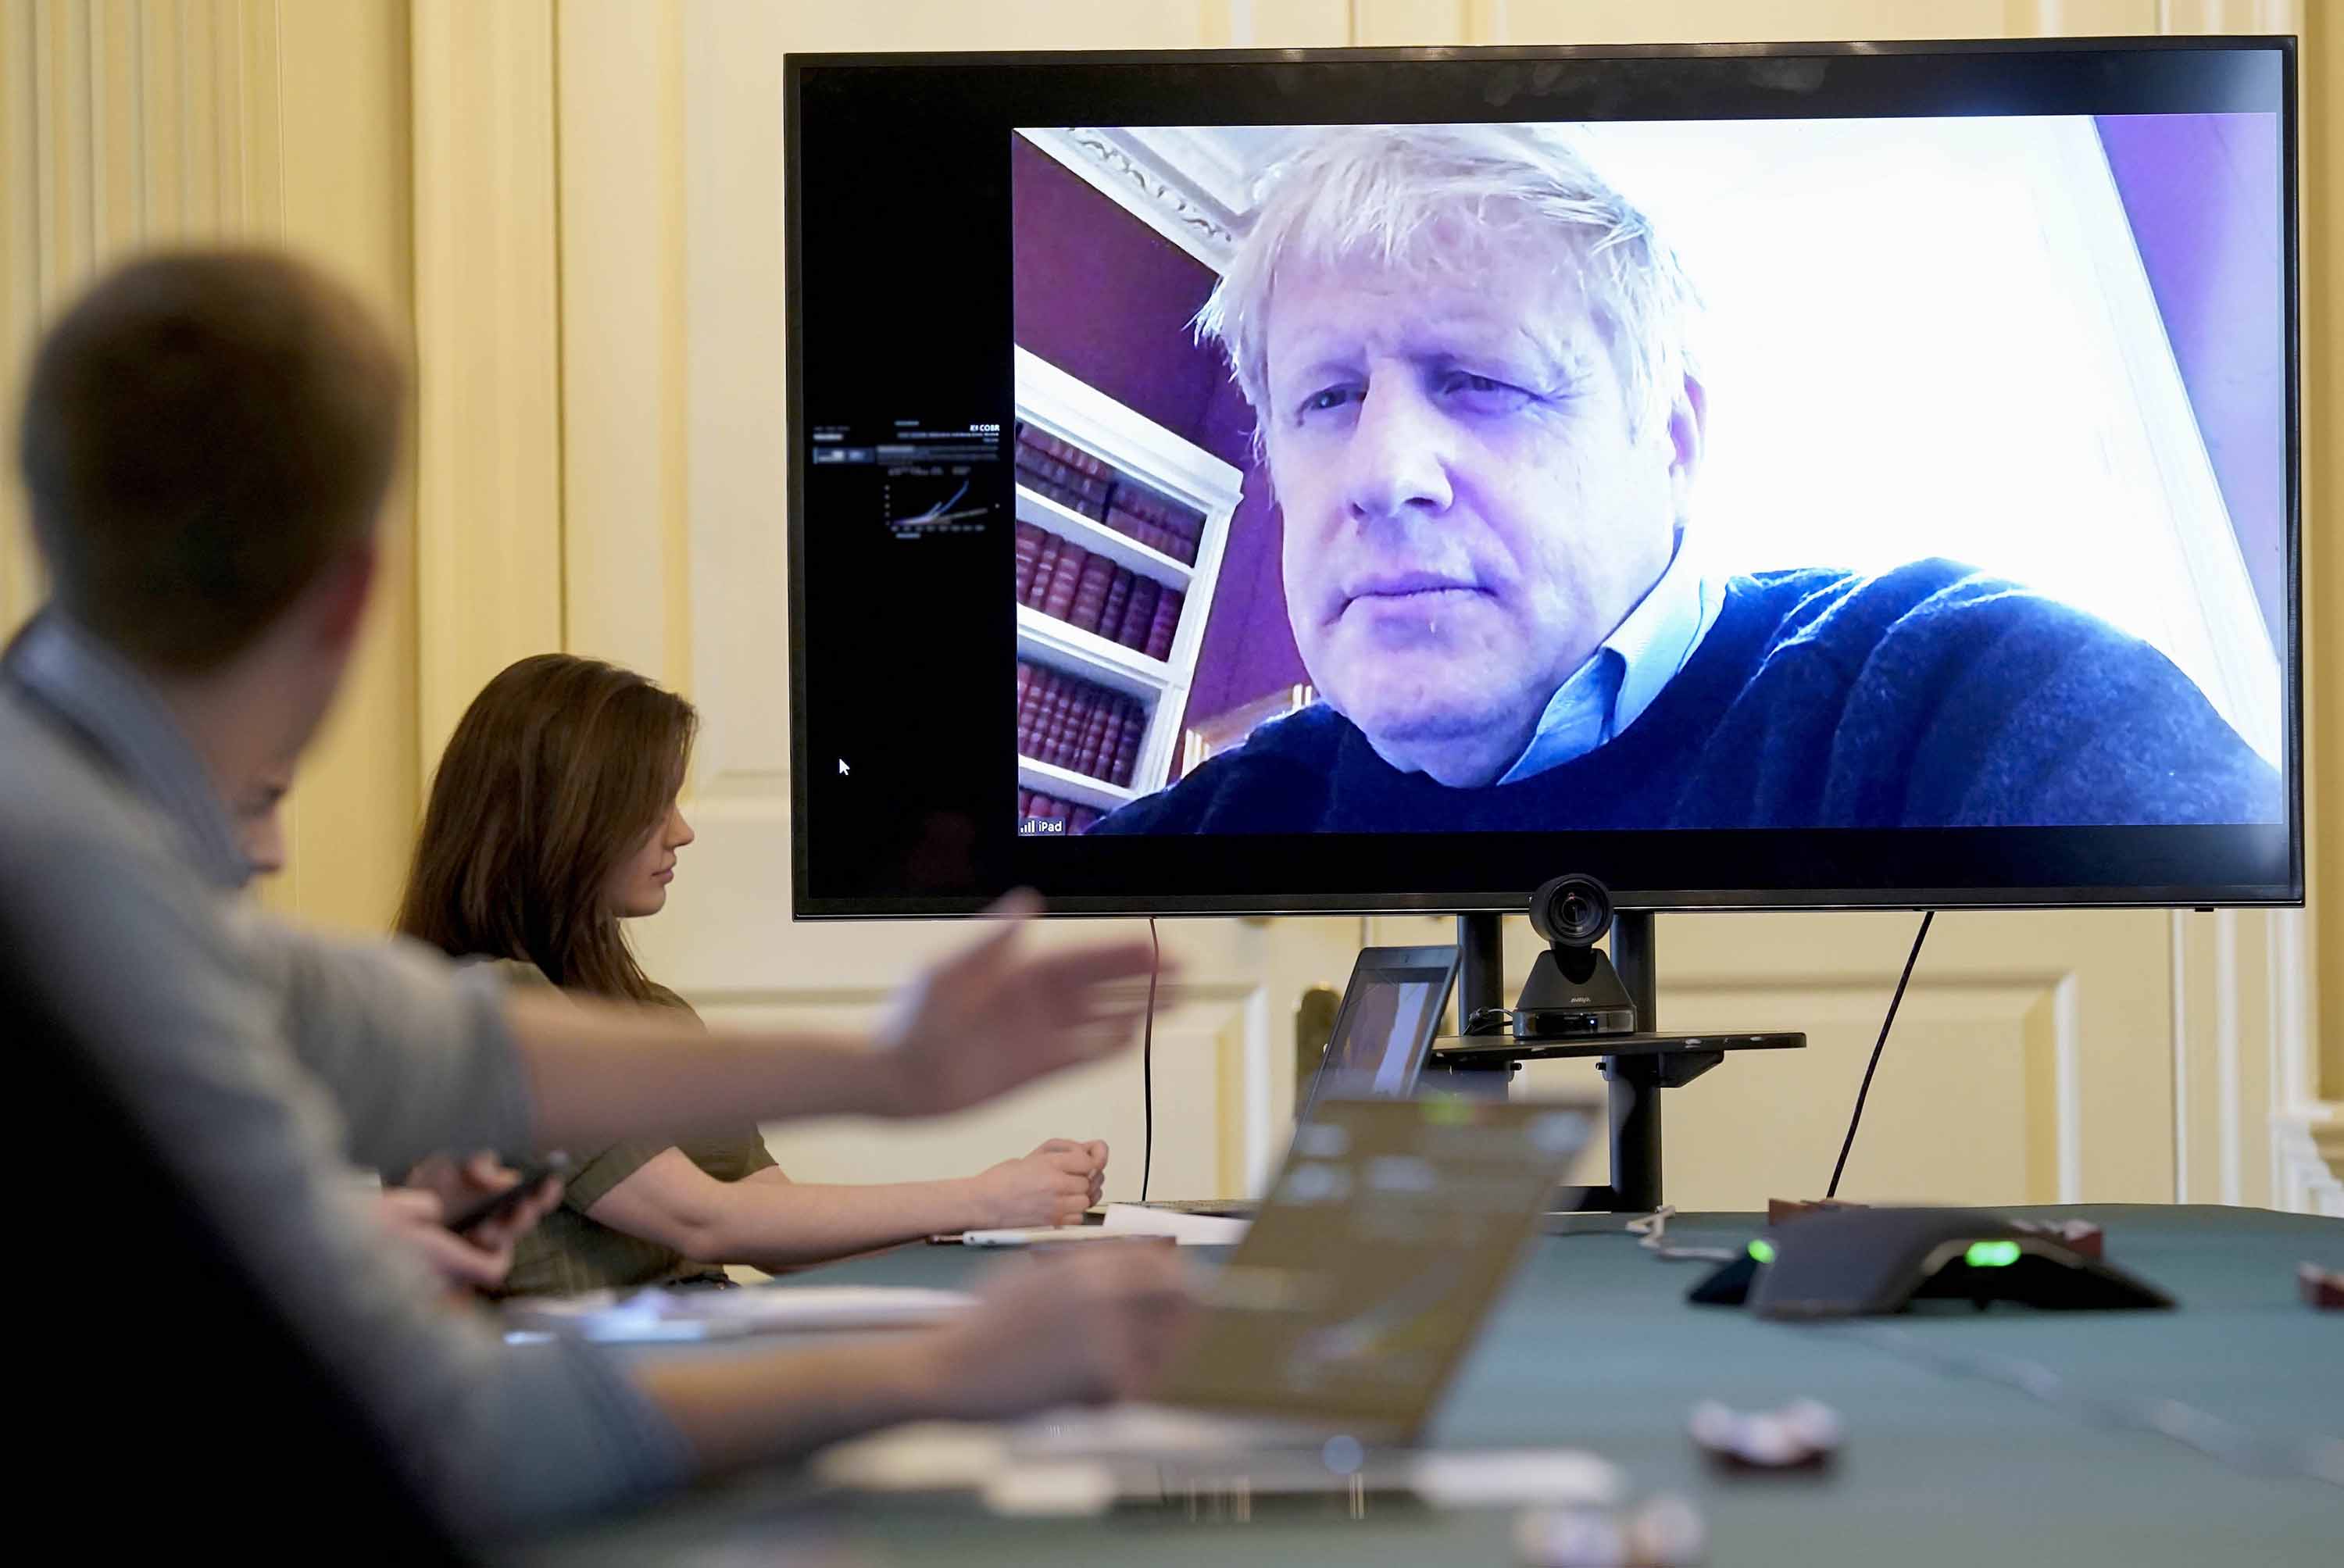 Britain's Prime Minister Boris Johnson chairs the morning Covid-19 Meeting remotely on Saturday, March 28, after testing positive for the virus.